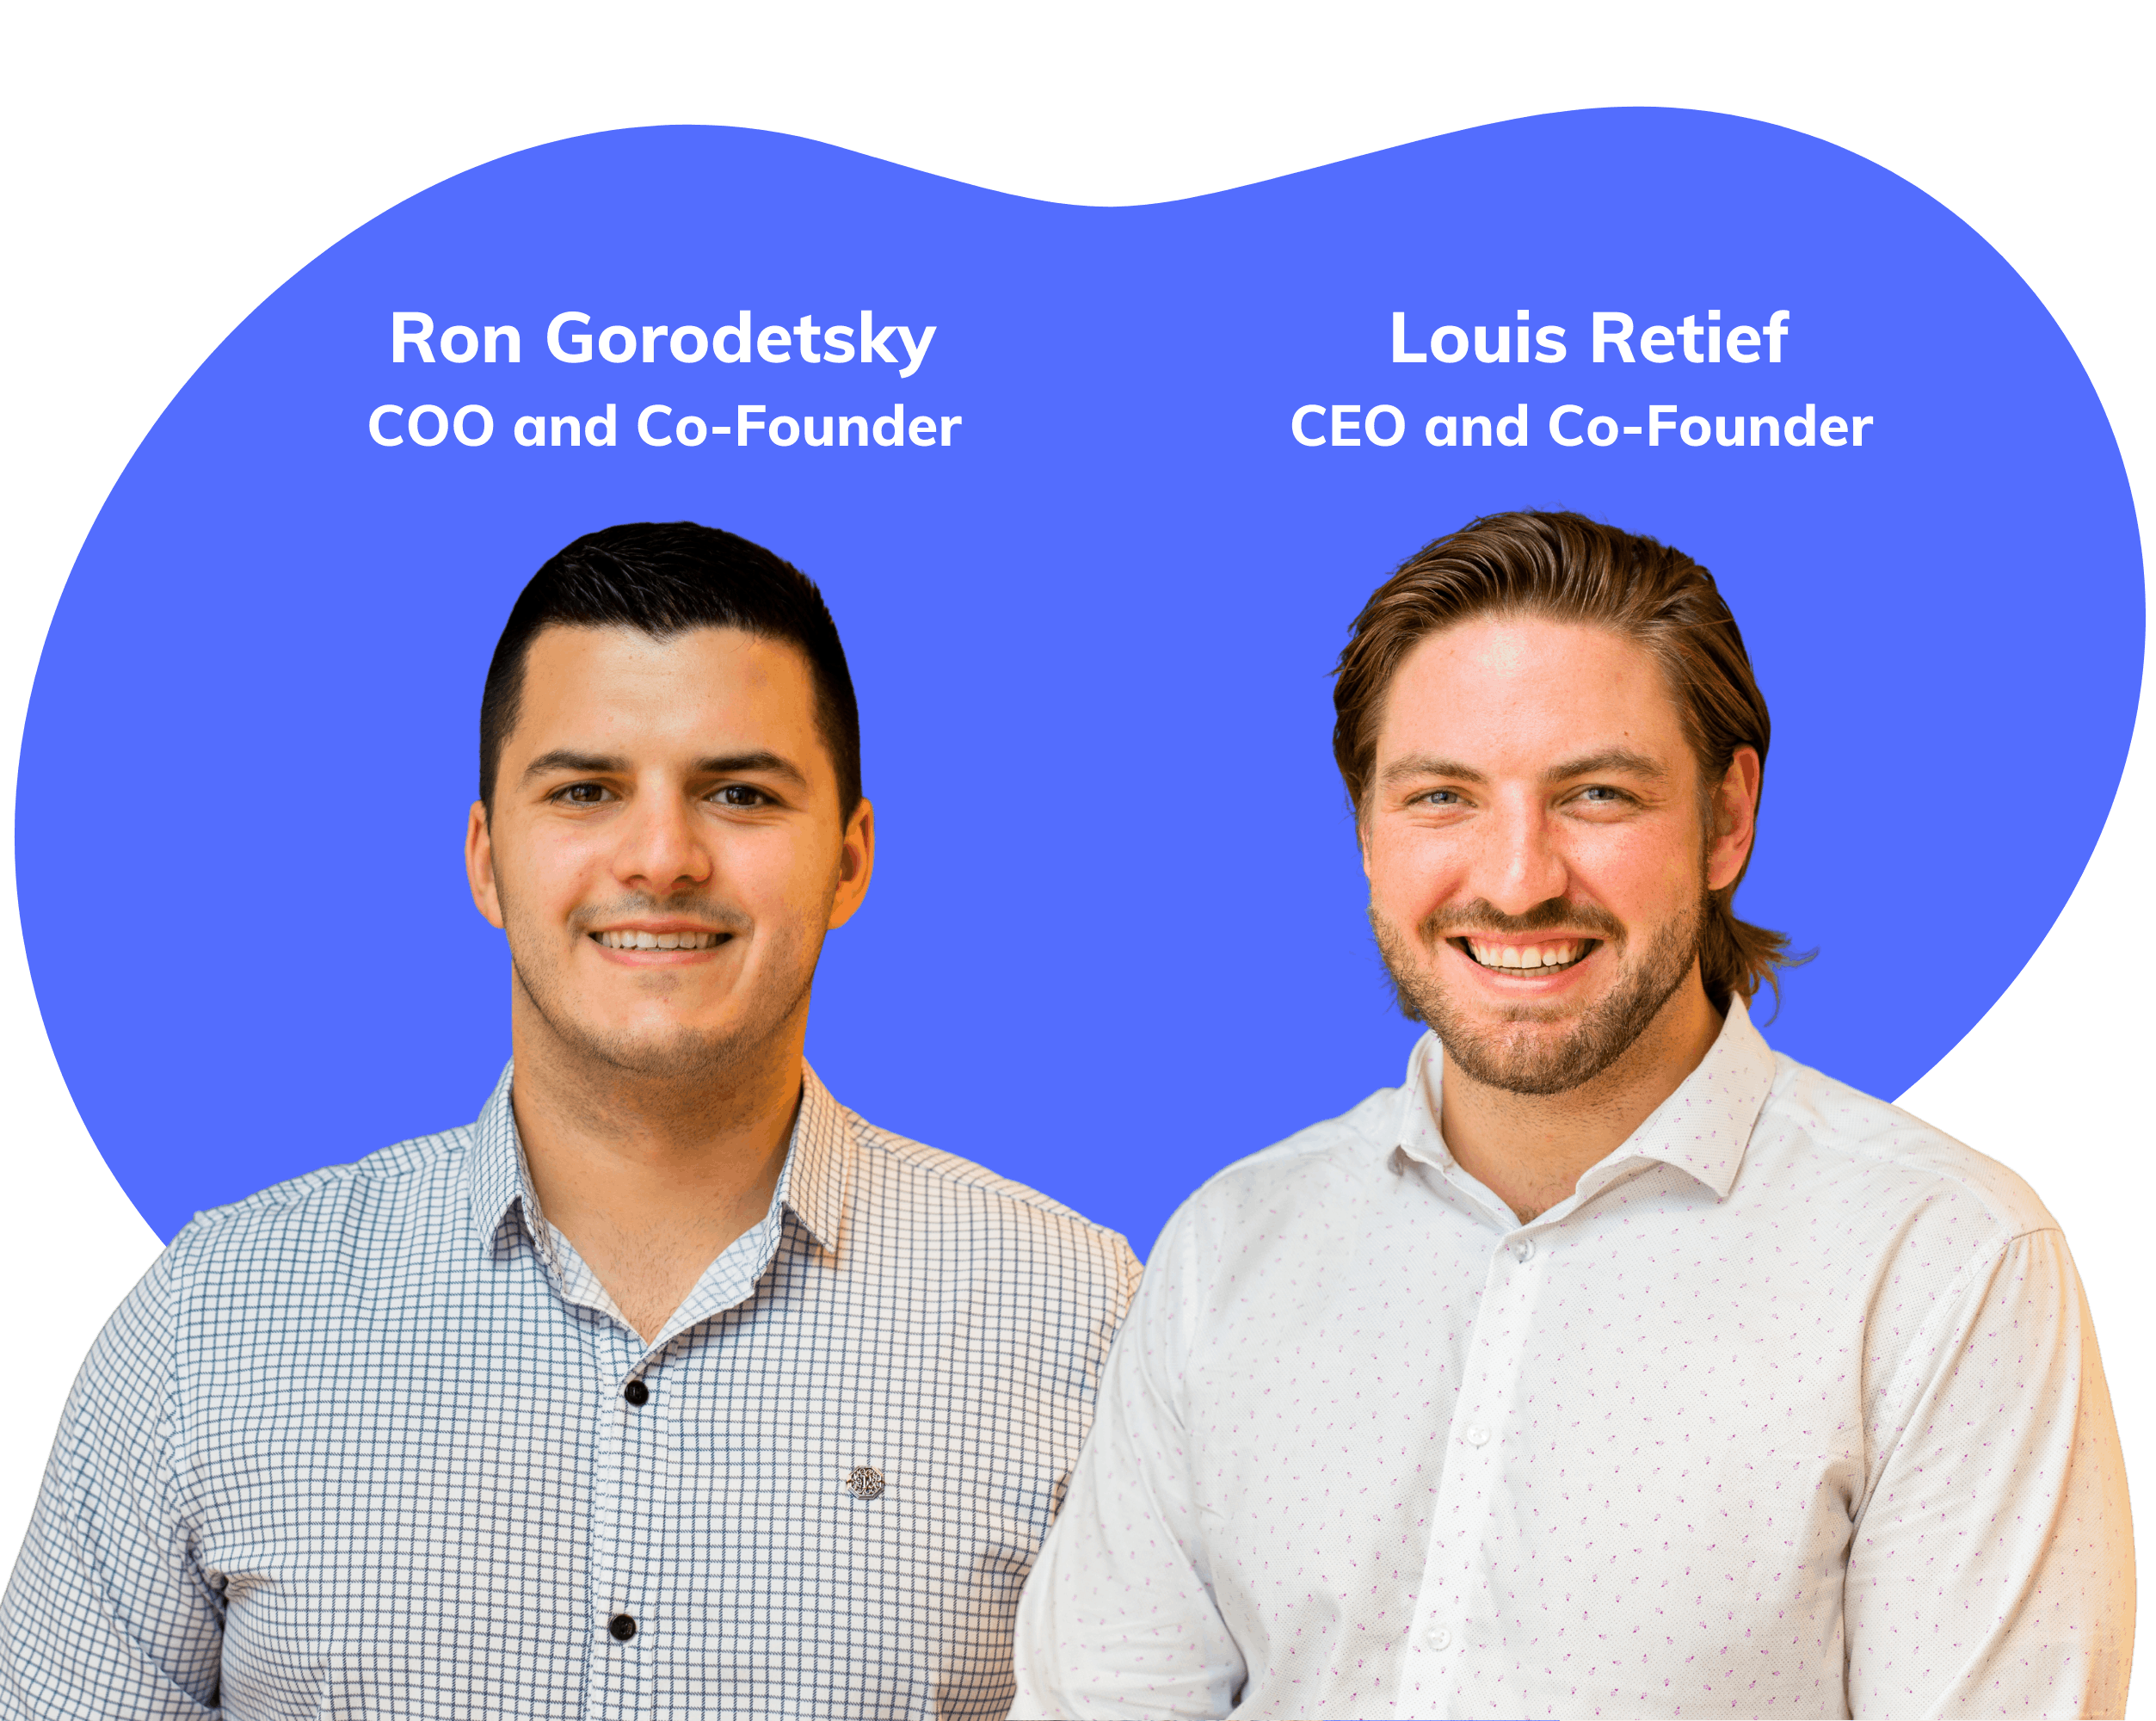 Hubly's Co-Founders, Louis Retief and Ron Gorodestky